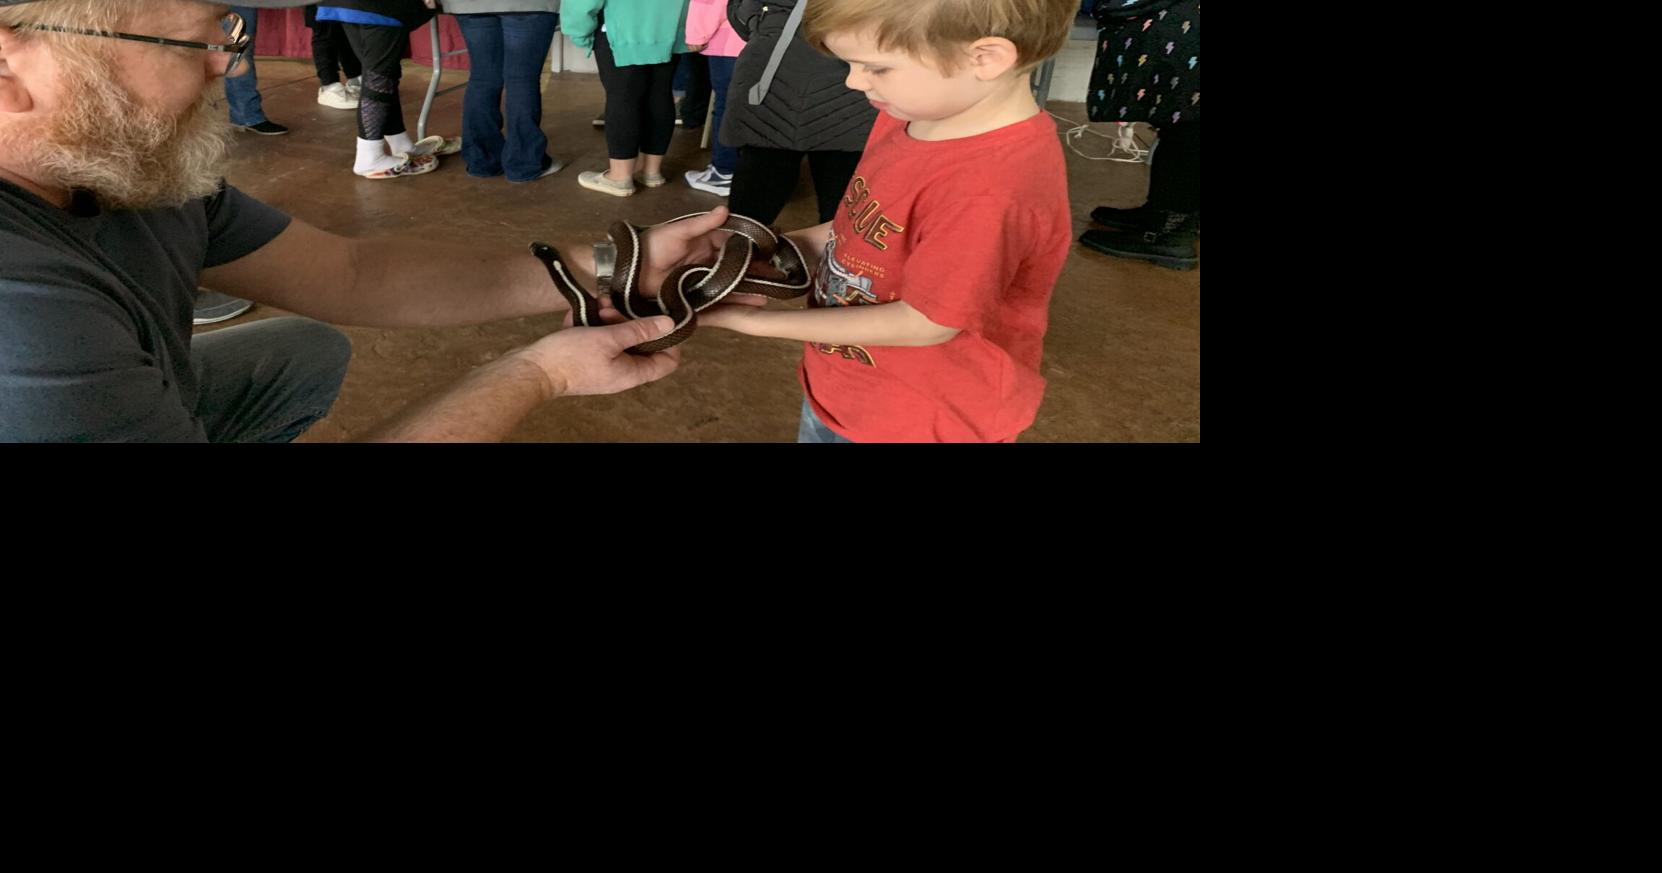 Reptiles exhibited at Saturday’s Bottle Works event in Cambria City | Latest News